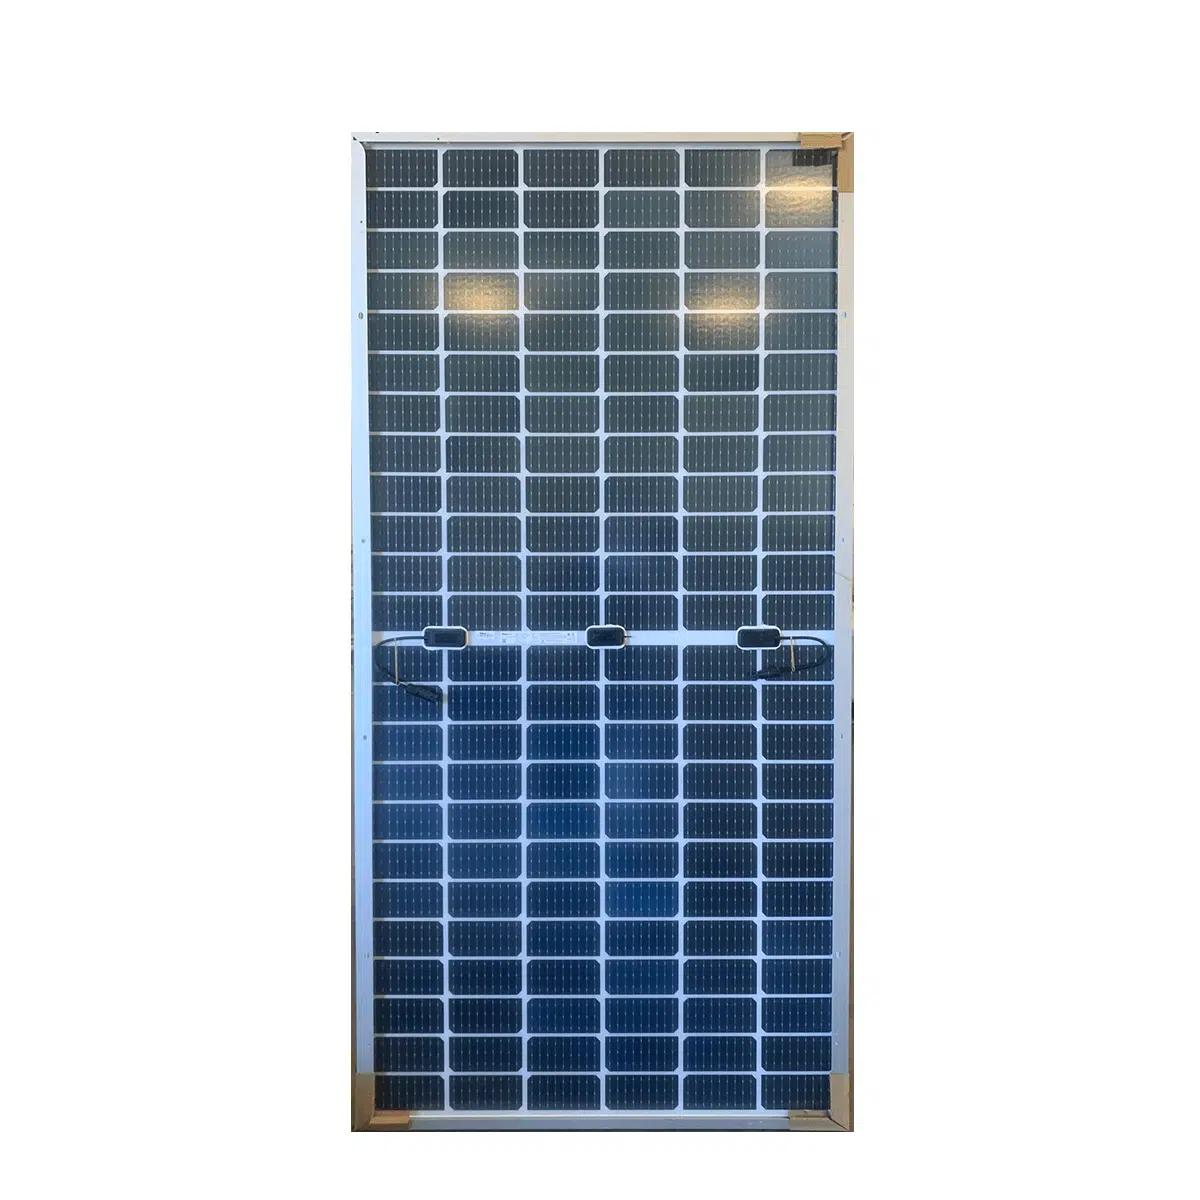 trina solar panels price - What country is Trina solar panel from